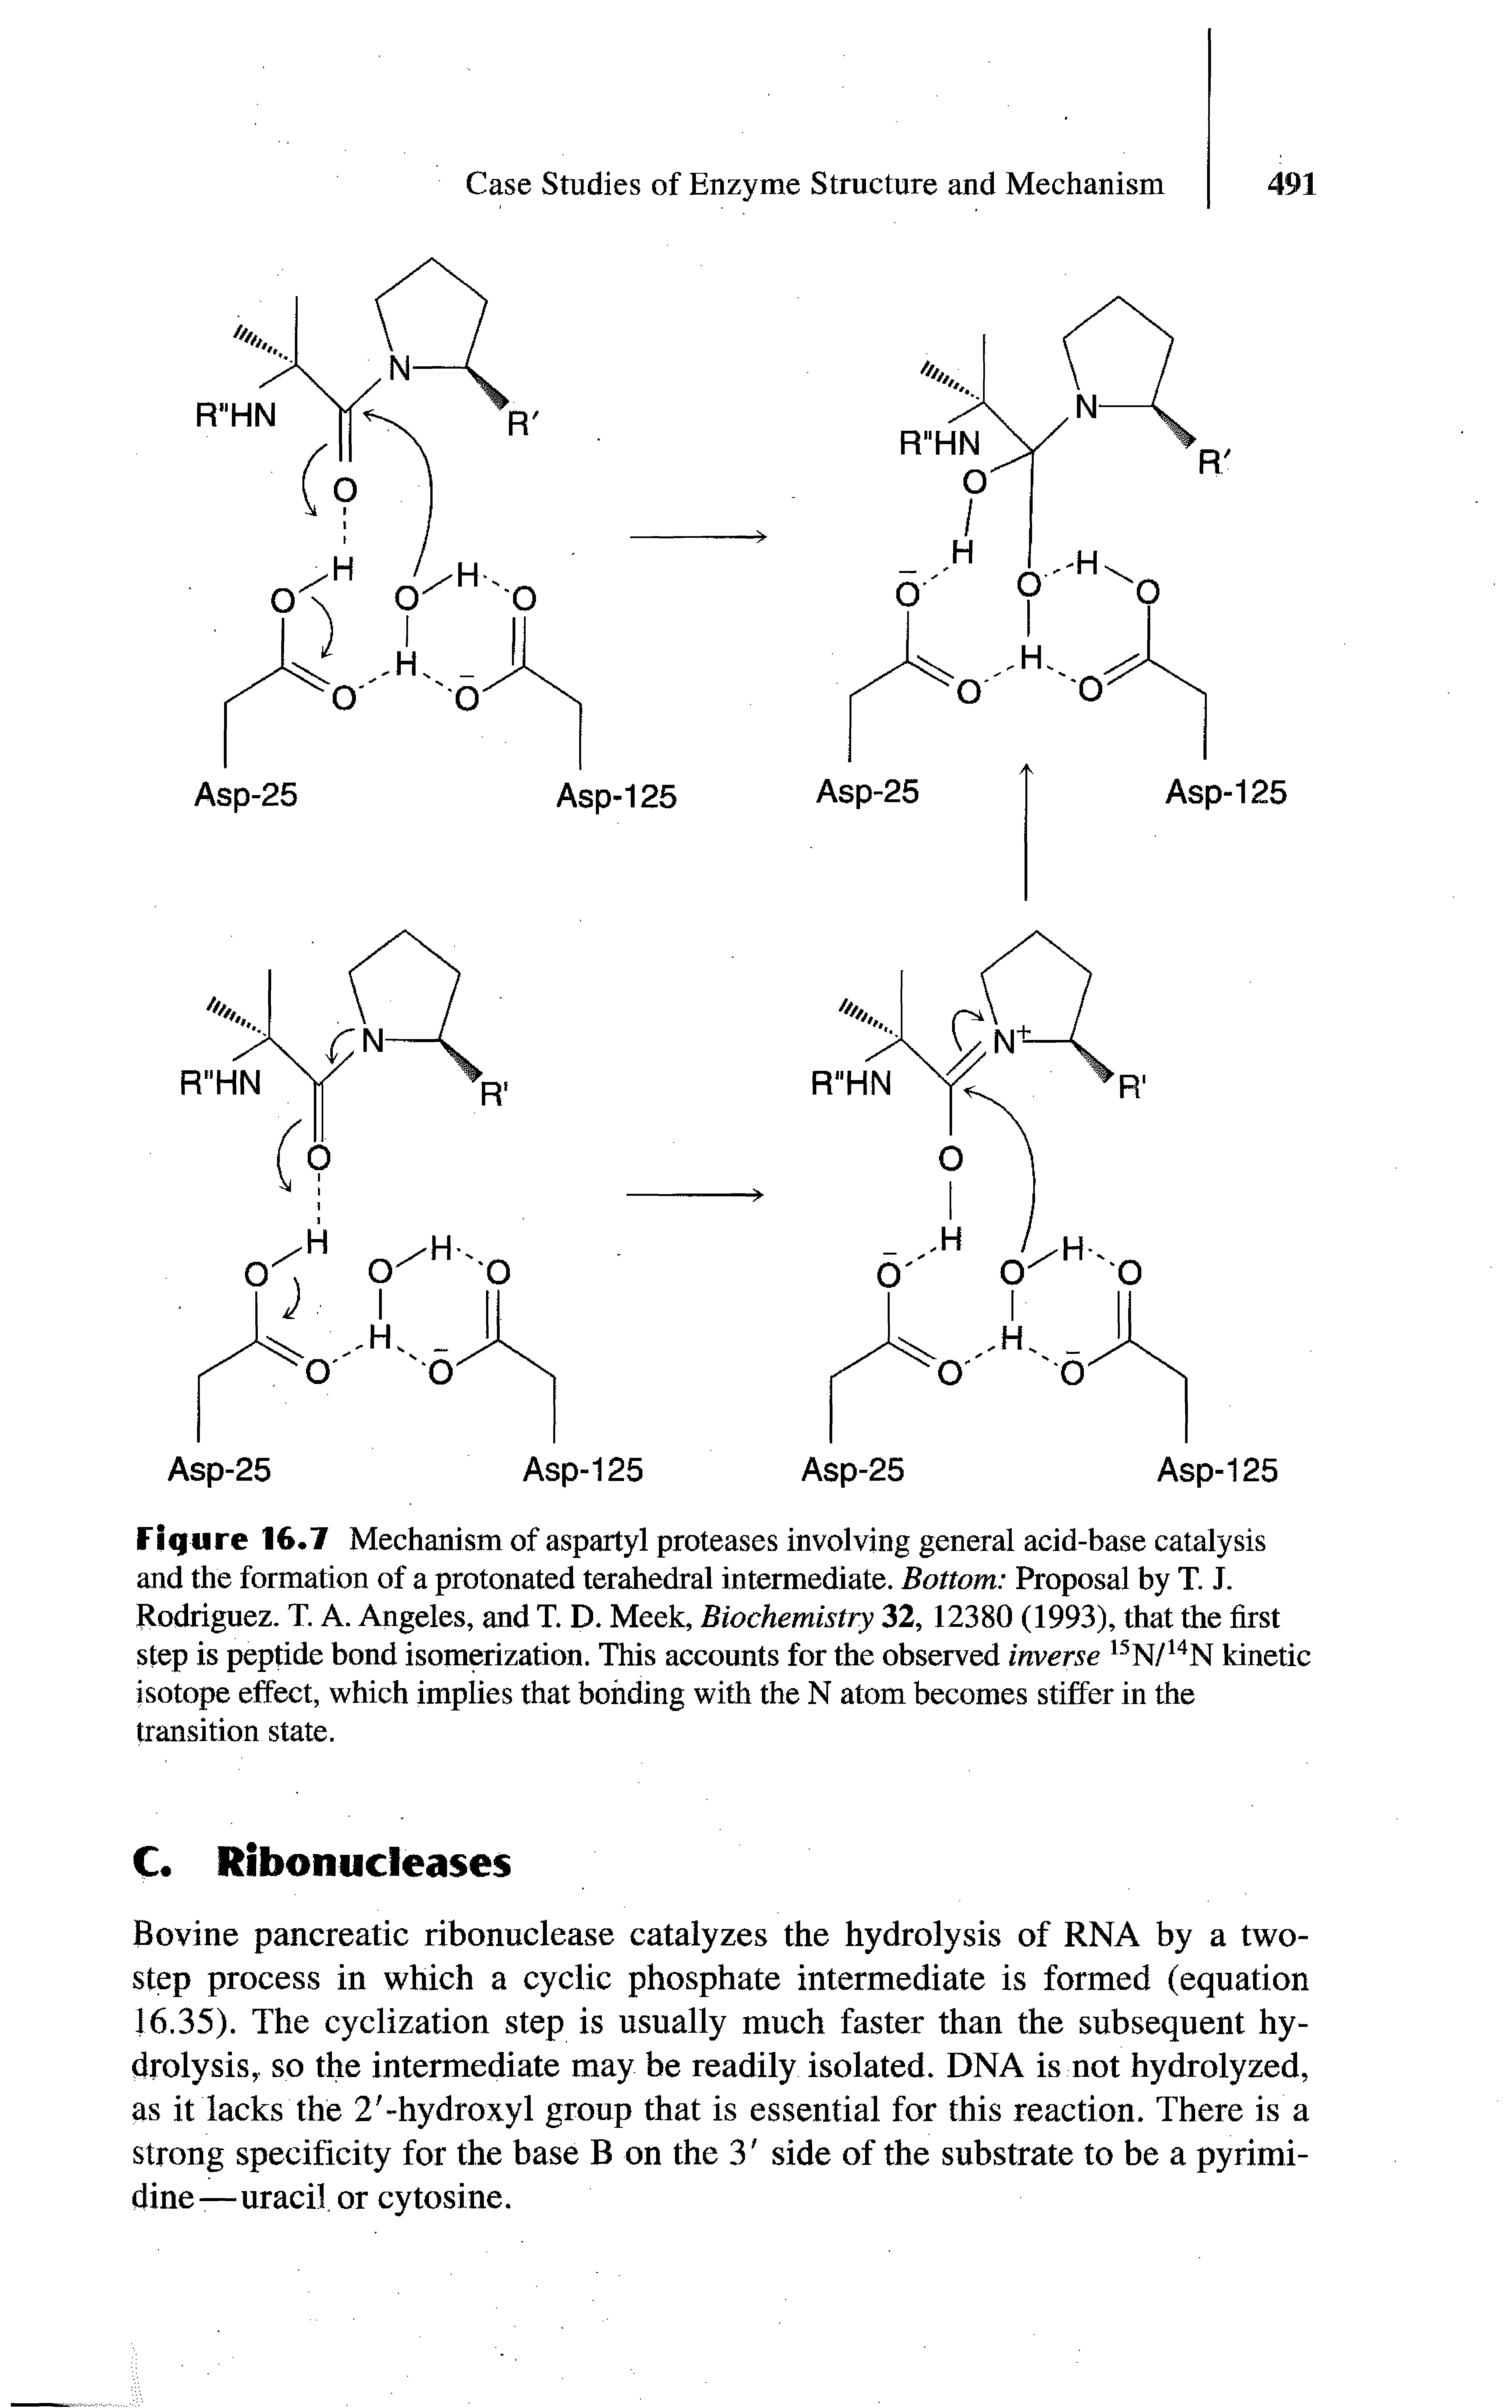 Figure 16.7 Mechanism of aspartyl proteases involving general acid-base catalysis and the formation of a protonated terahedral intermediate. Bottom Proposal by T. J. Rodriguez. T. A. Angeles, and T. D. Meek, Biochemistry 32, 12380 (1993), that the first step is peptide bond isomerization. This accounts for the observed inverse 15N/14N kinetic isotope effect, which implies that bonding with the N atom becomes stiffer in the transition state.